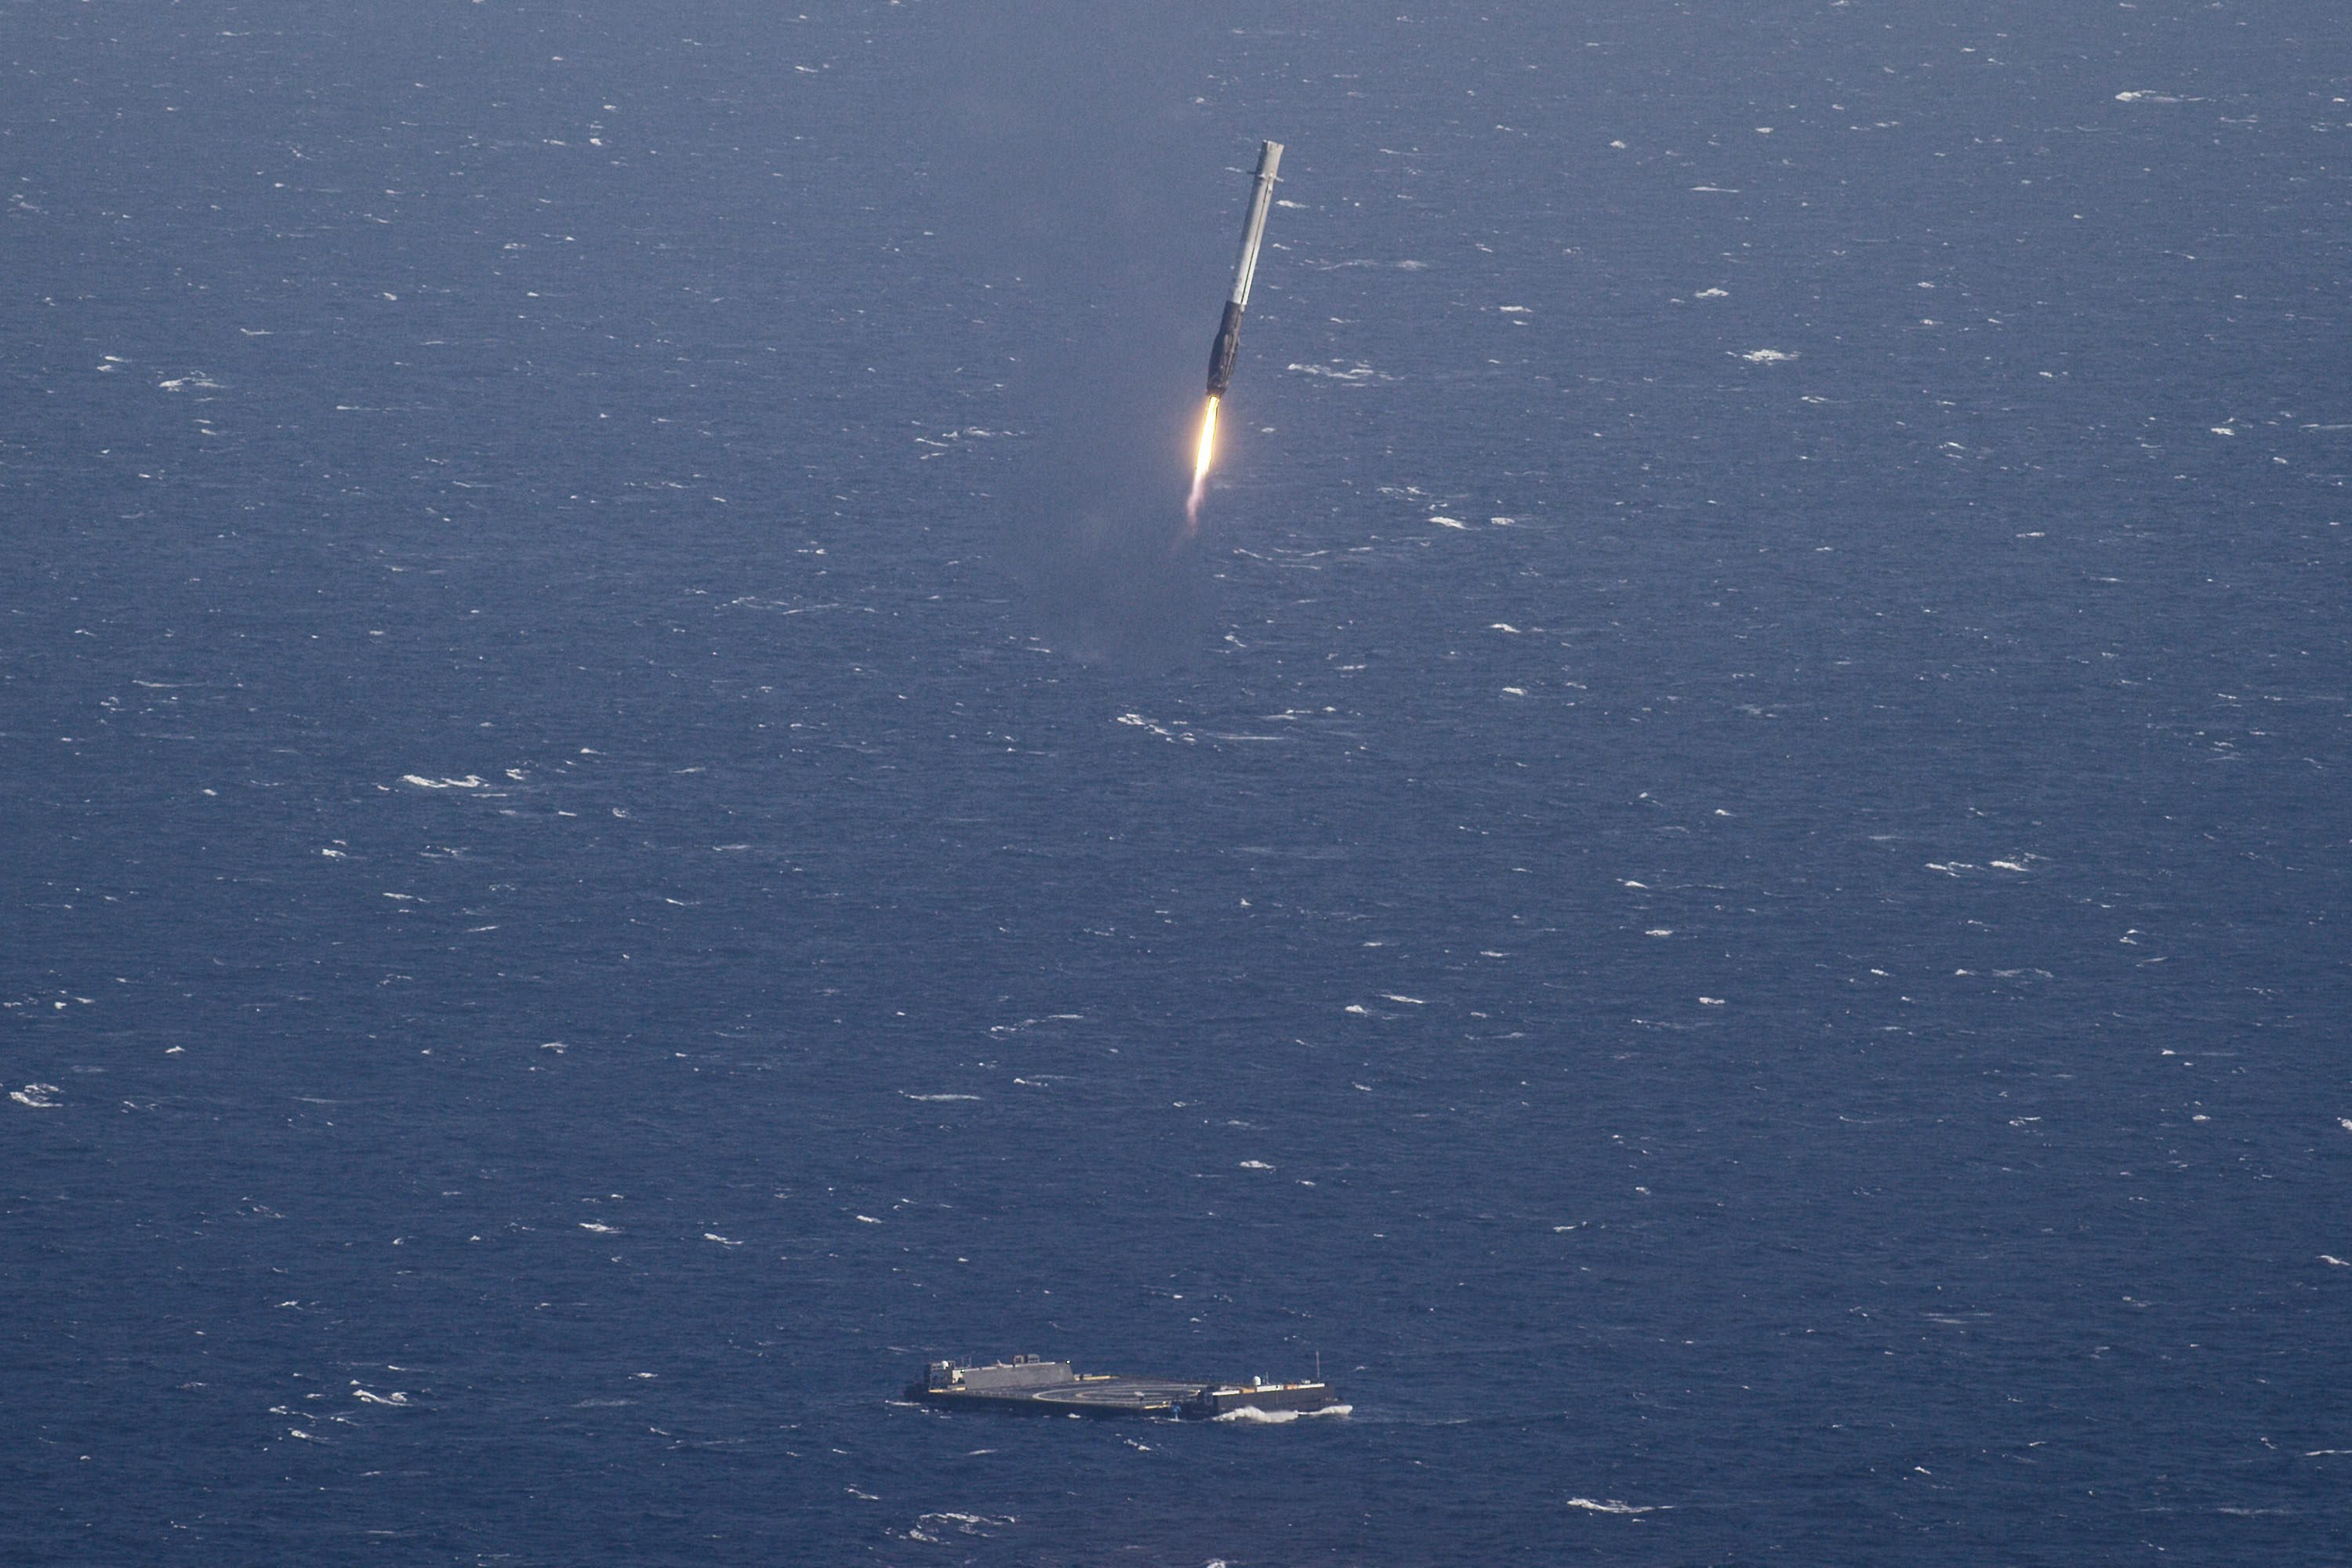 SpaceX Falcon 9 rocket successful landing on a floating platform in the Atlantic Ocean